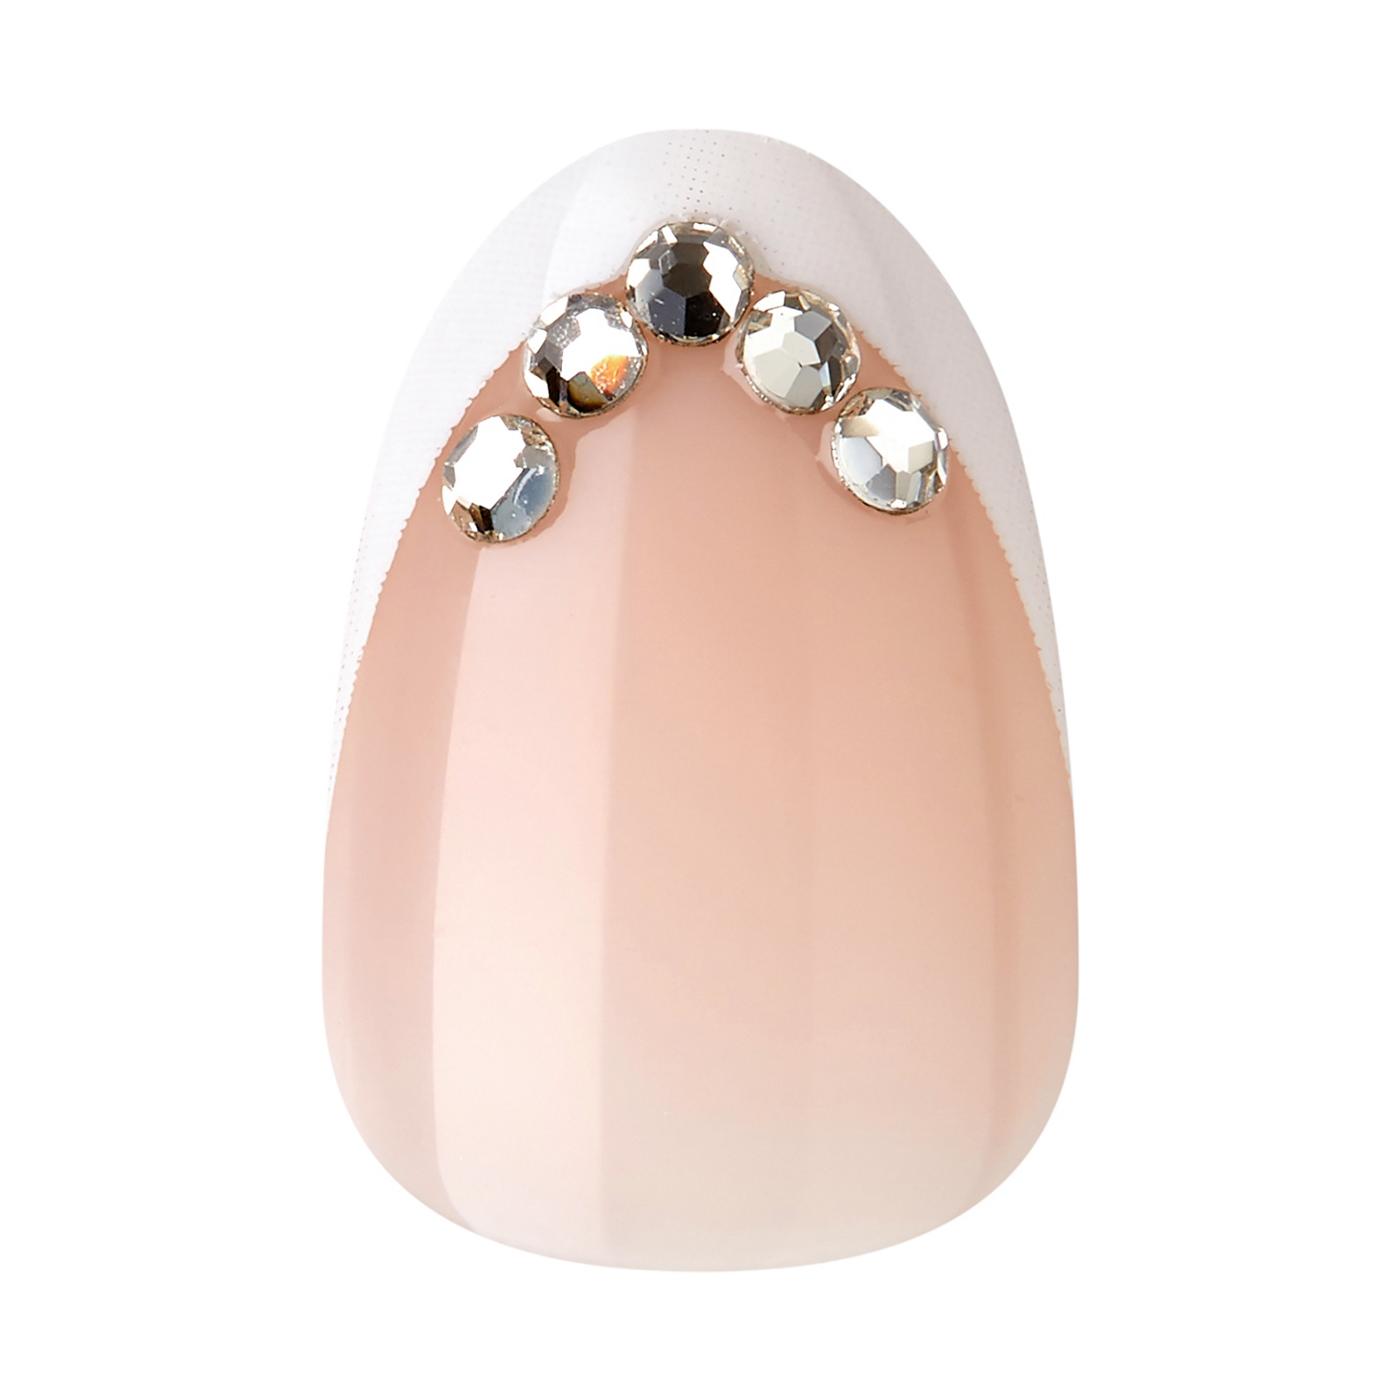 KISS Classy Premium Nails - Prevailing; image 6 of 6